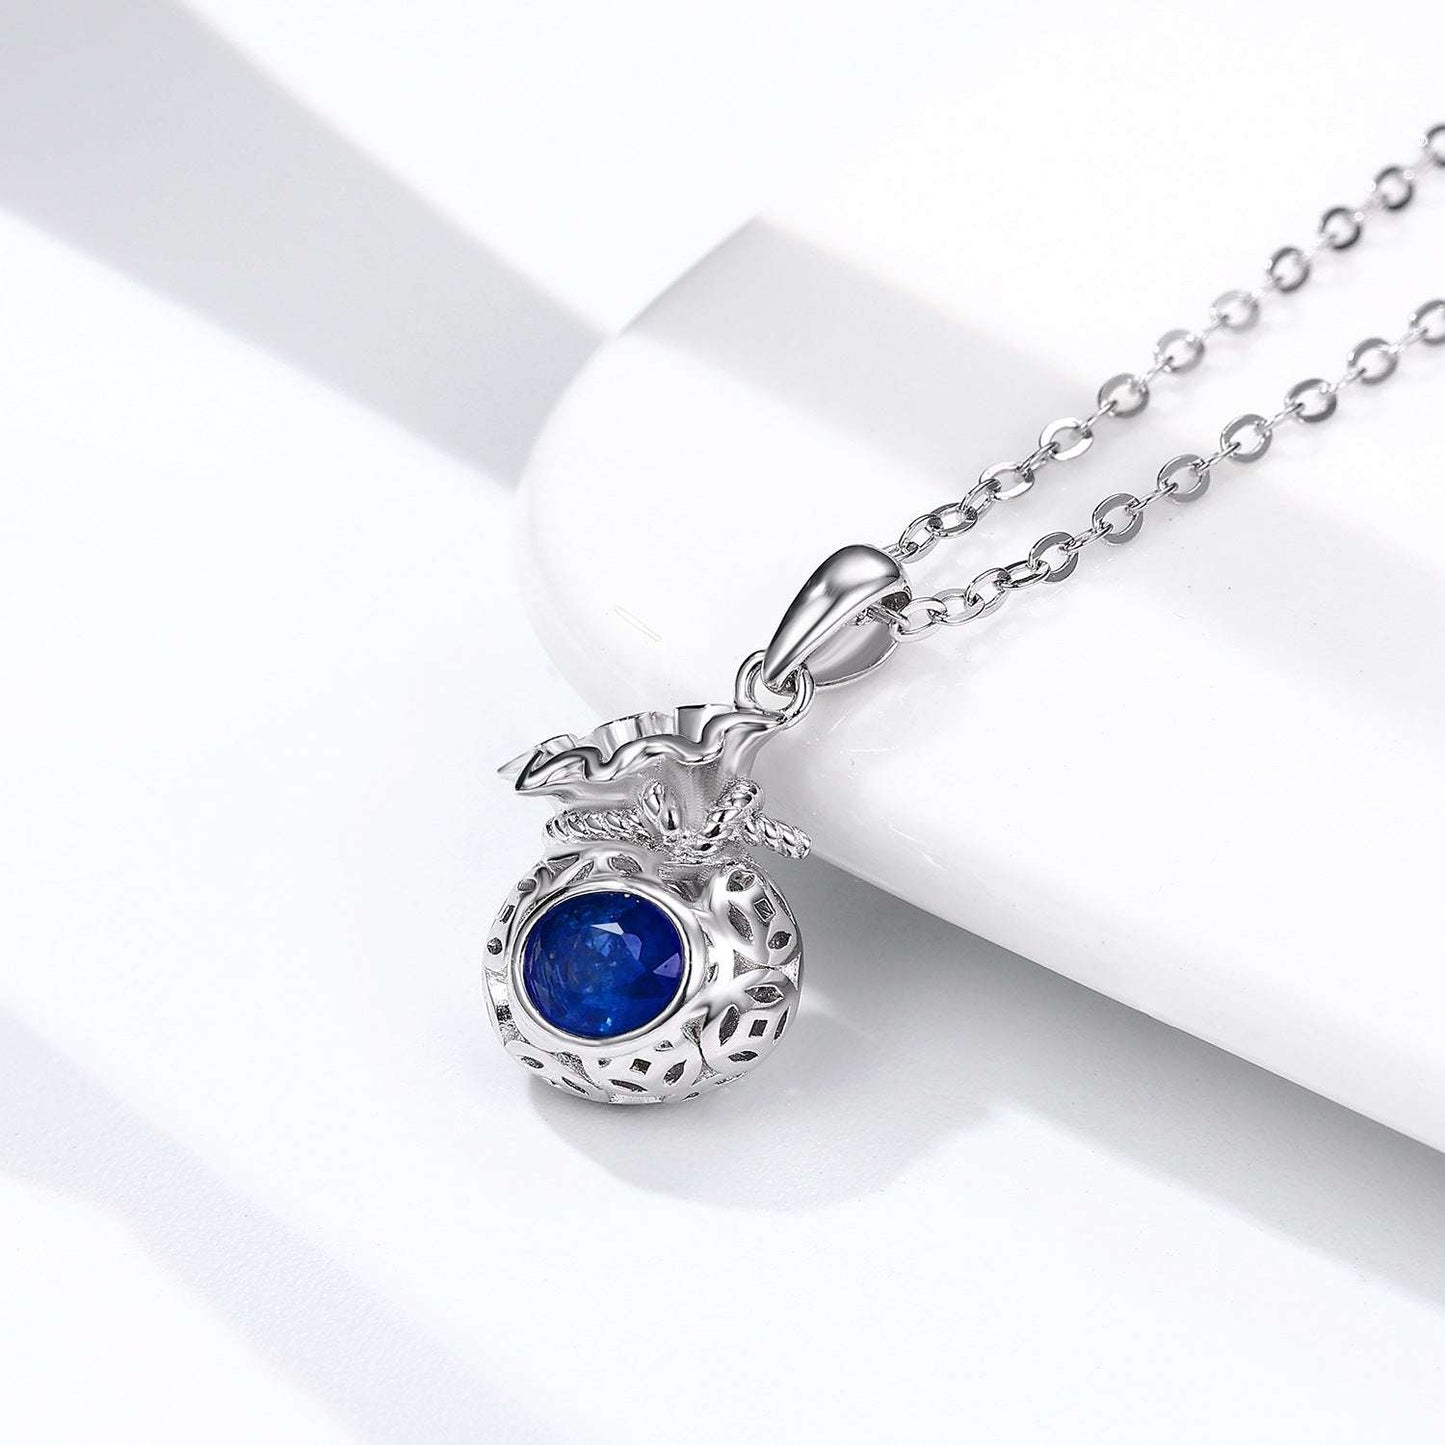 Blessing Bag Necklace, S925 Silver, Sapphire Pendant - available at Sparq Mart